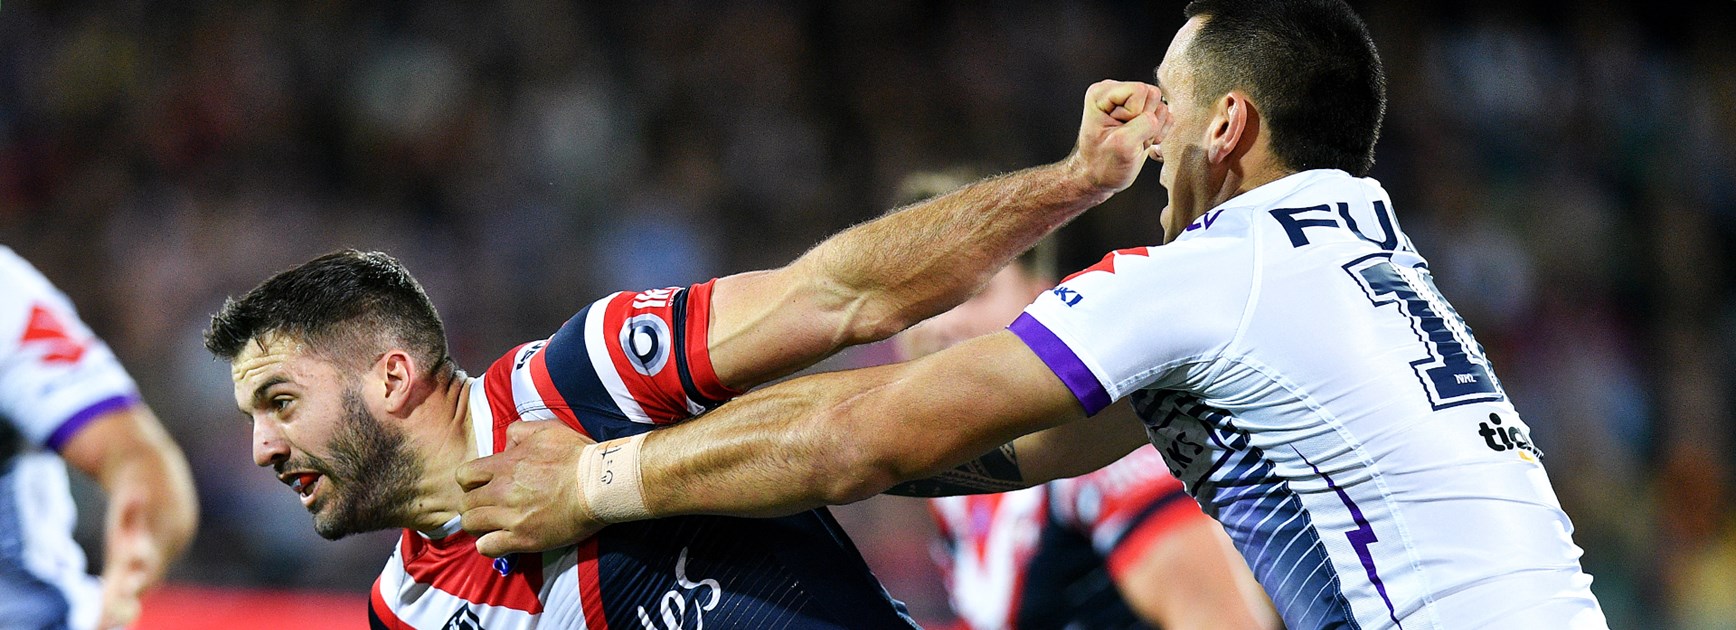 Match Preview | Roosters v Storm